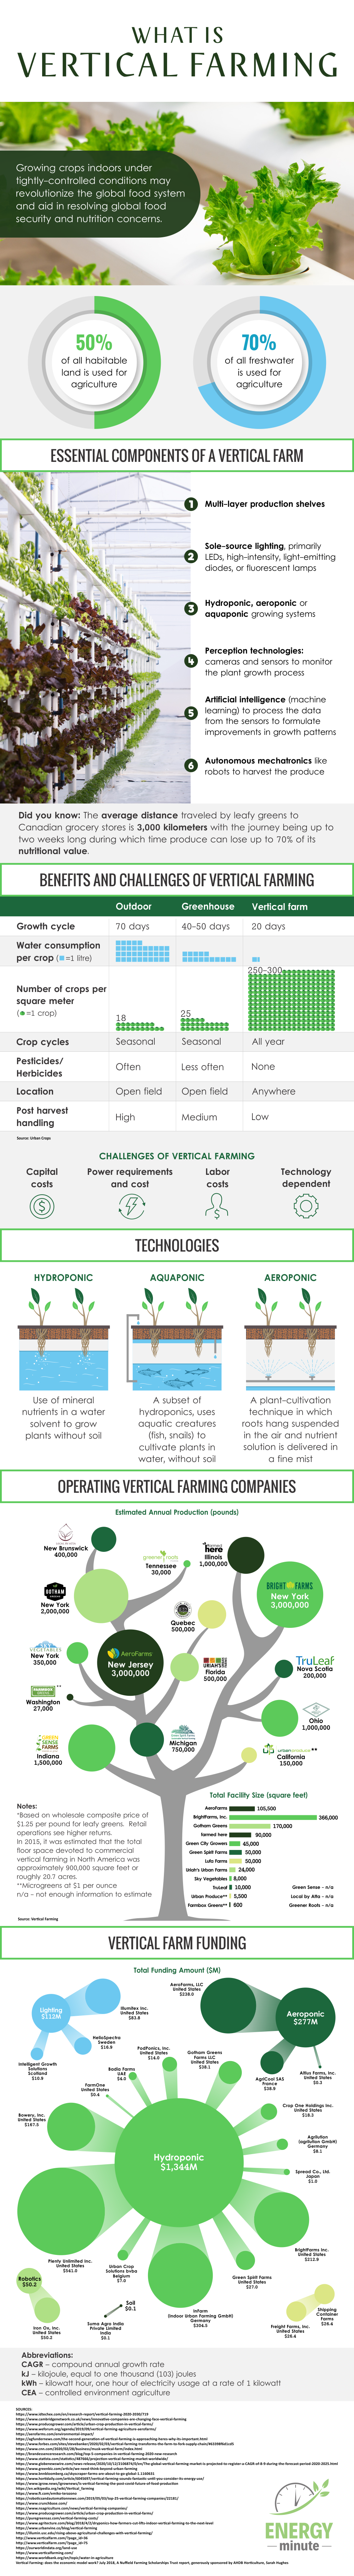 Vertical Farming: An Ancient Industry is Growing Up